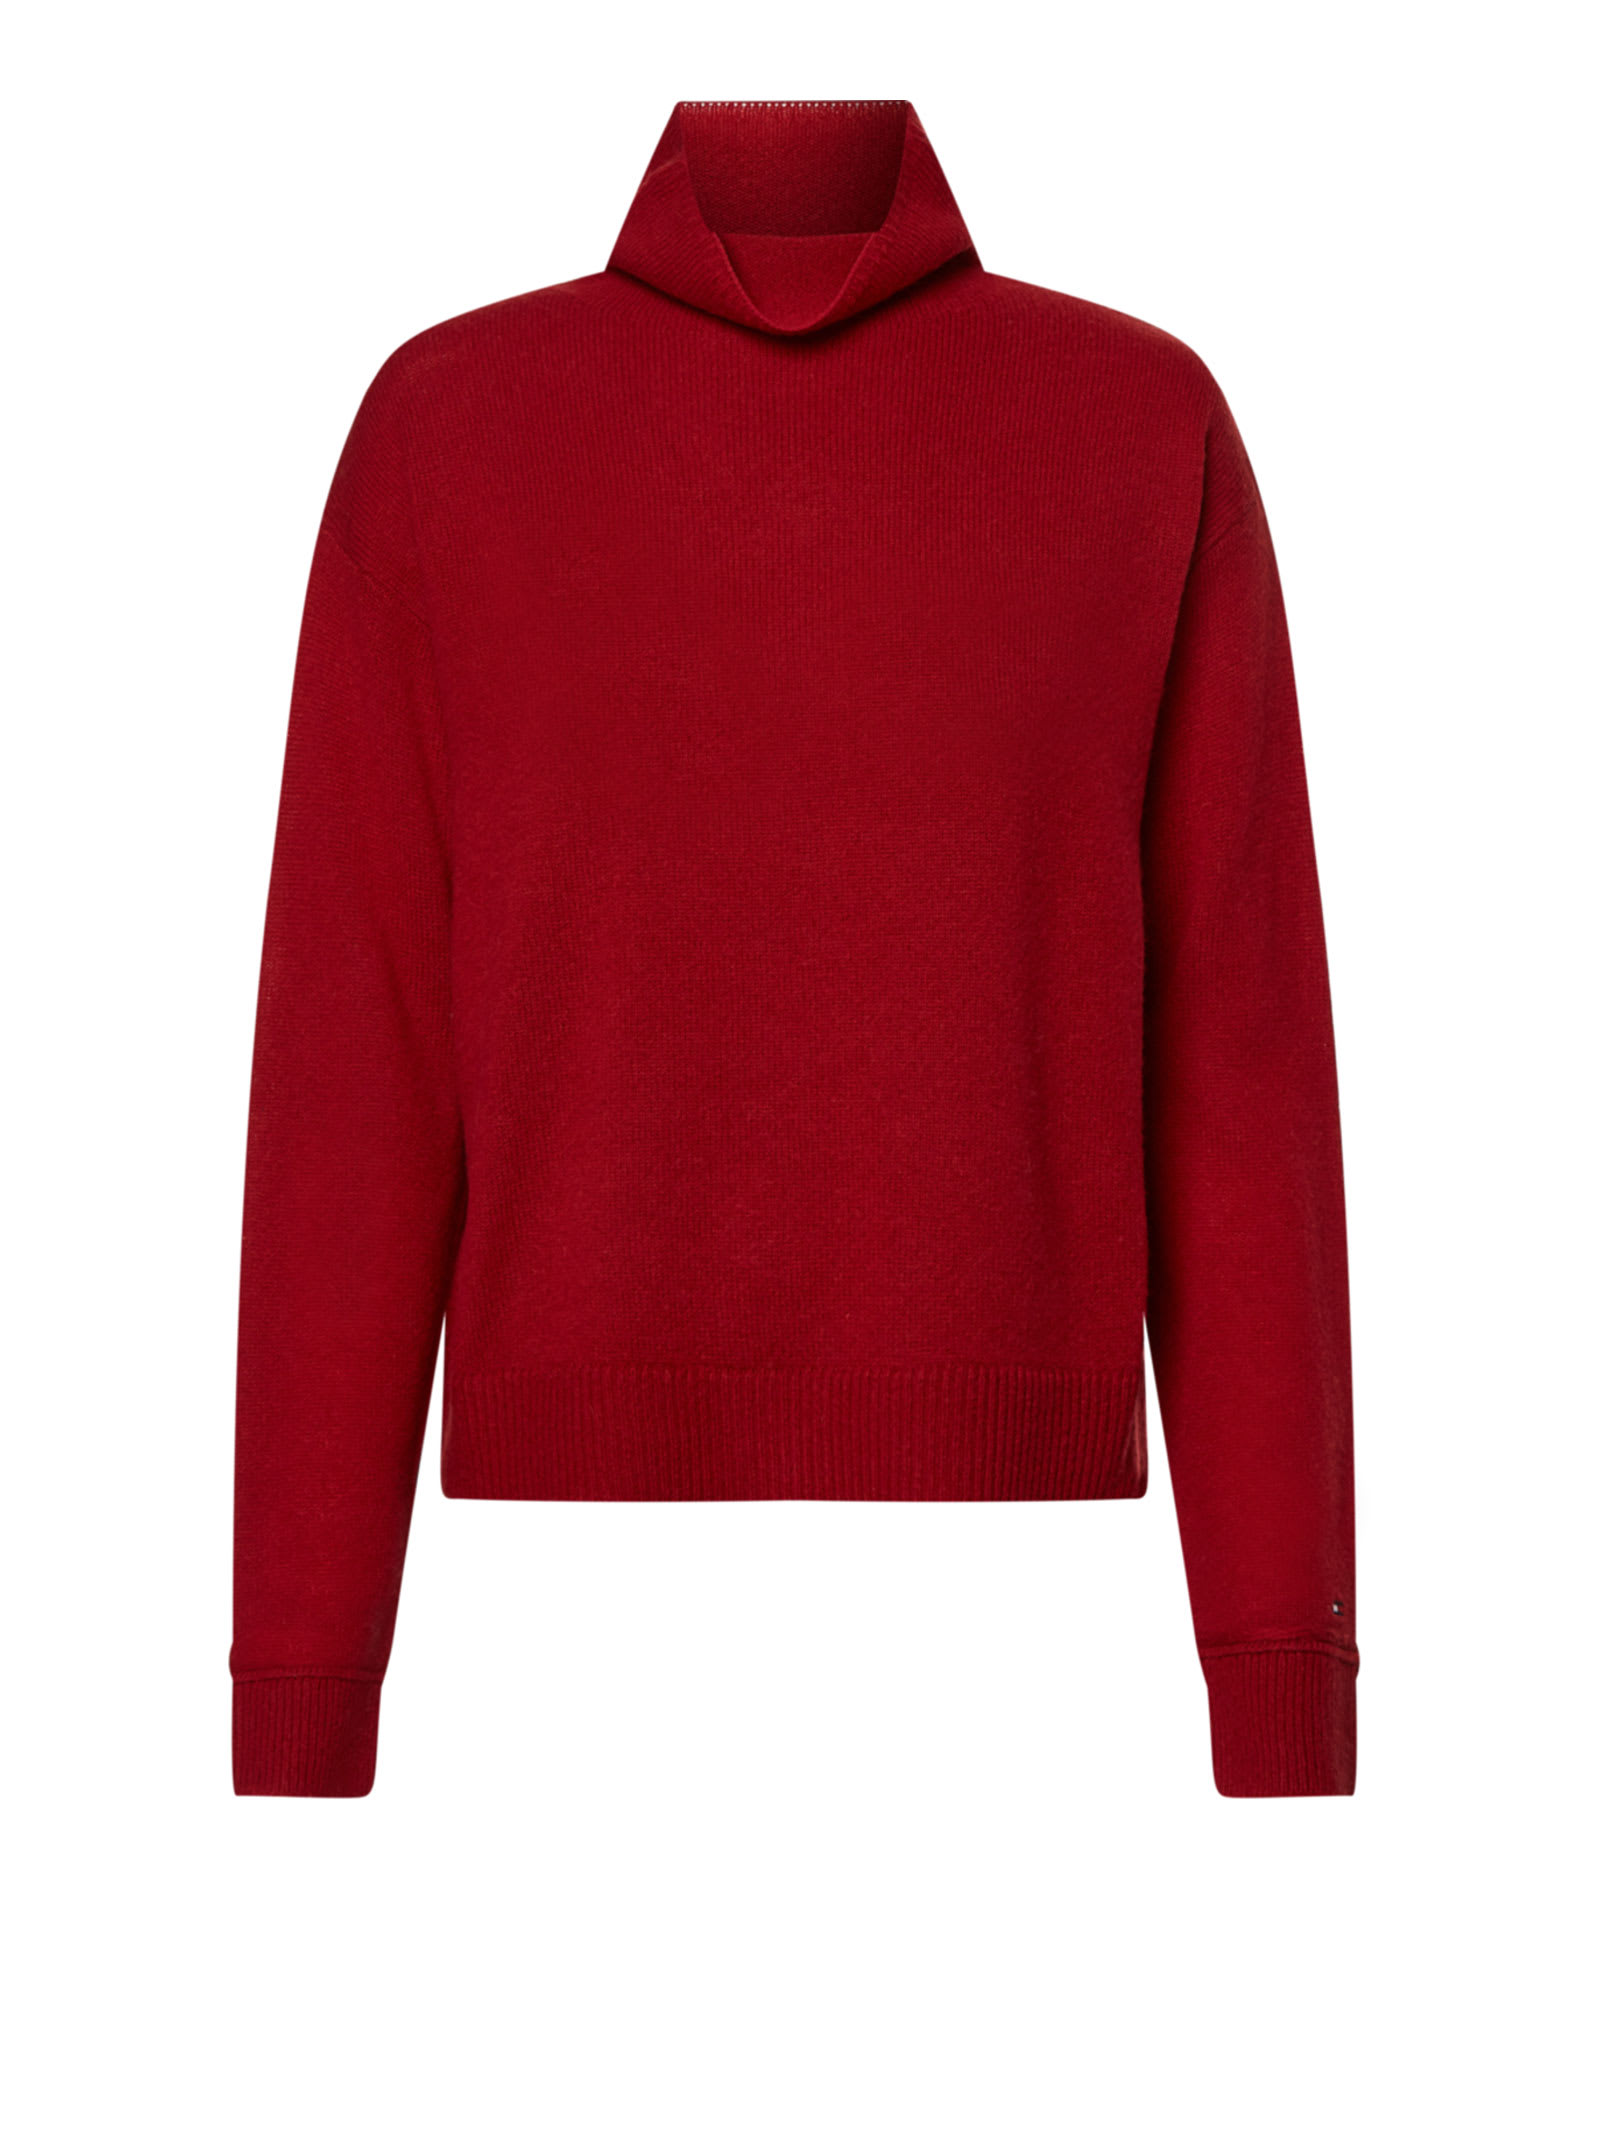 Tommy Hilfiger Turtleneck With Relax Collar